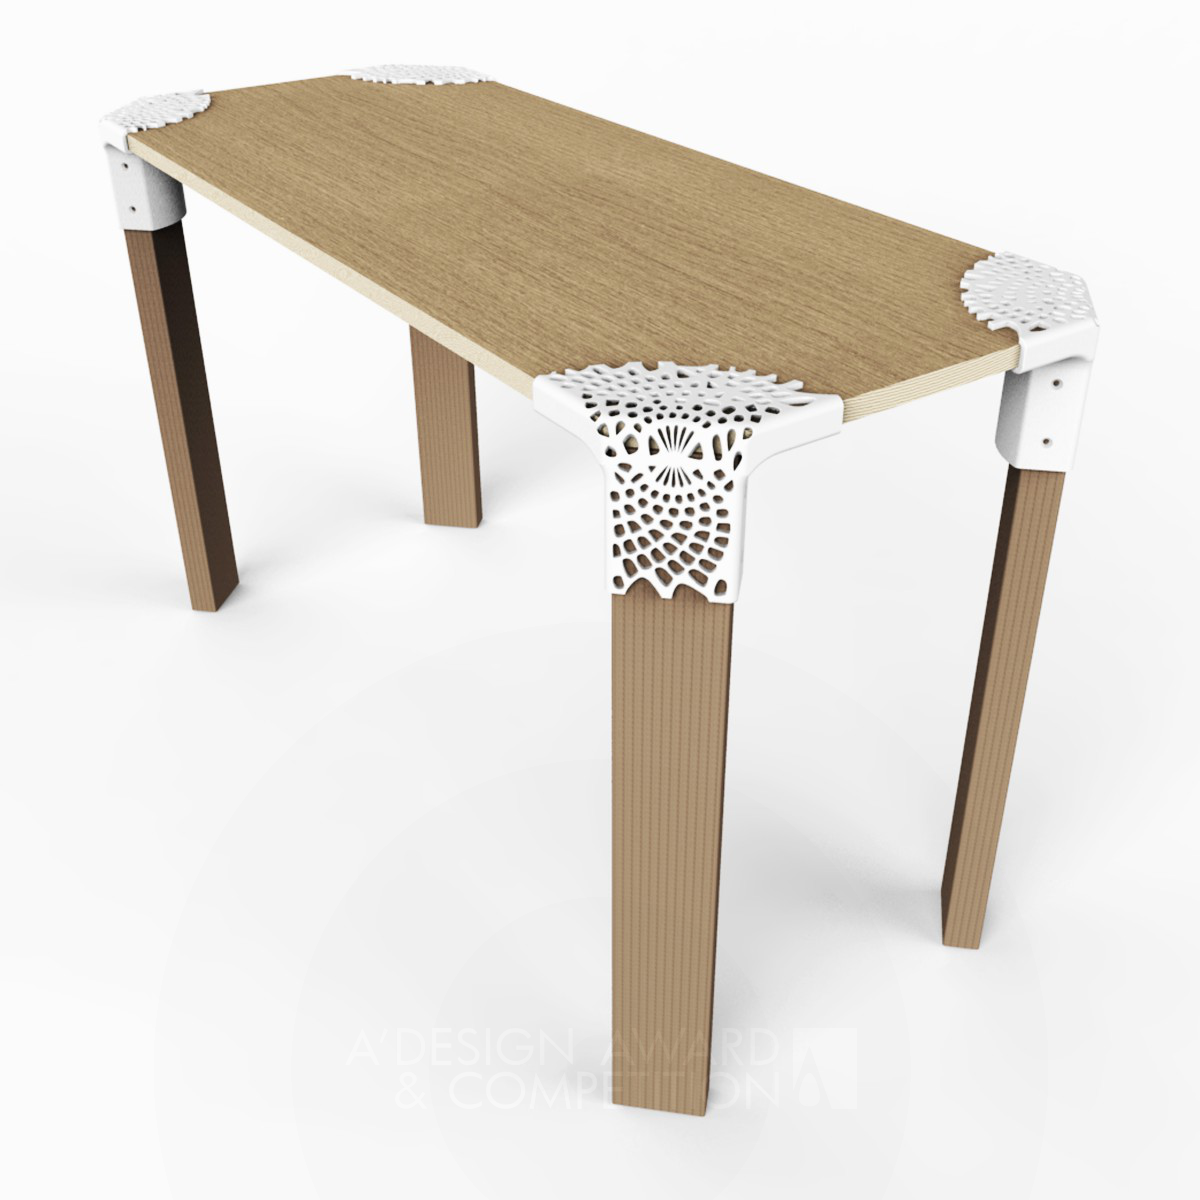 The Joint Table by Tong Jin (TJ) Kim